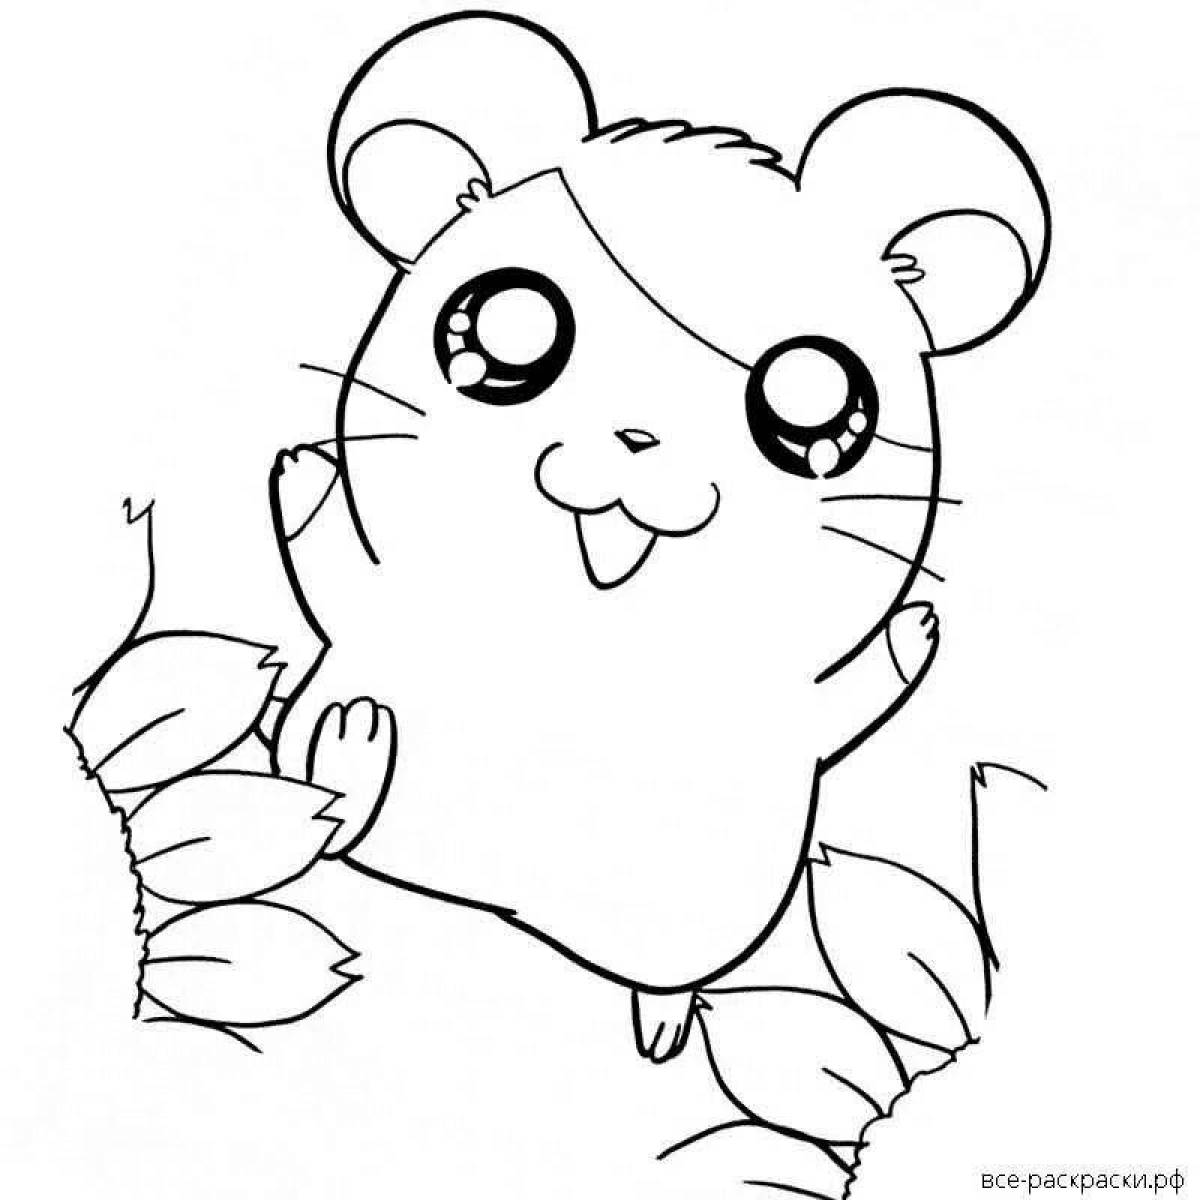 Calm hamster coloring page